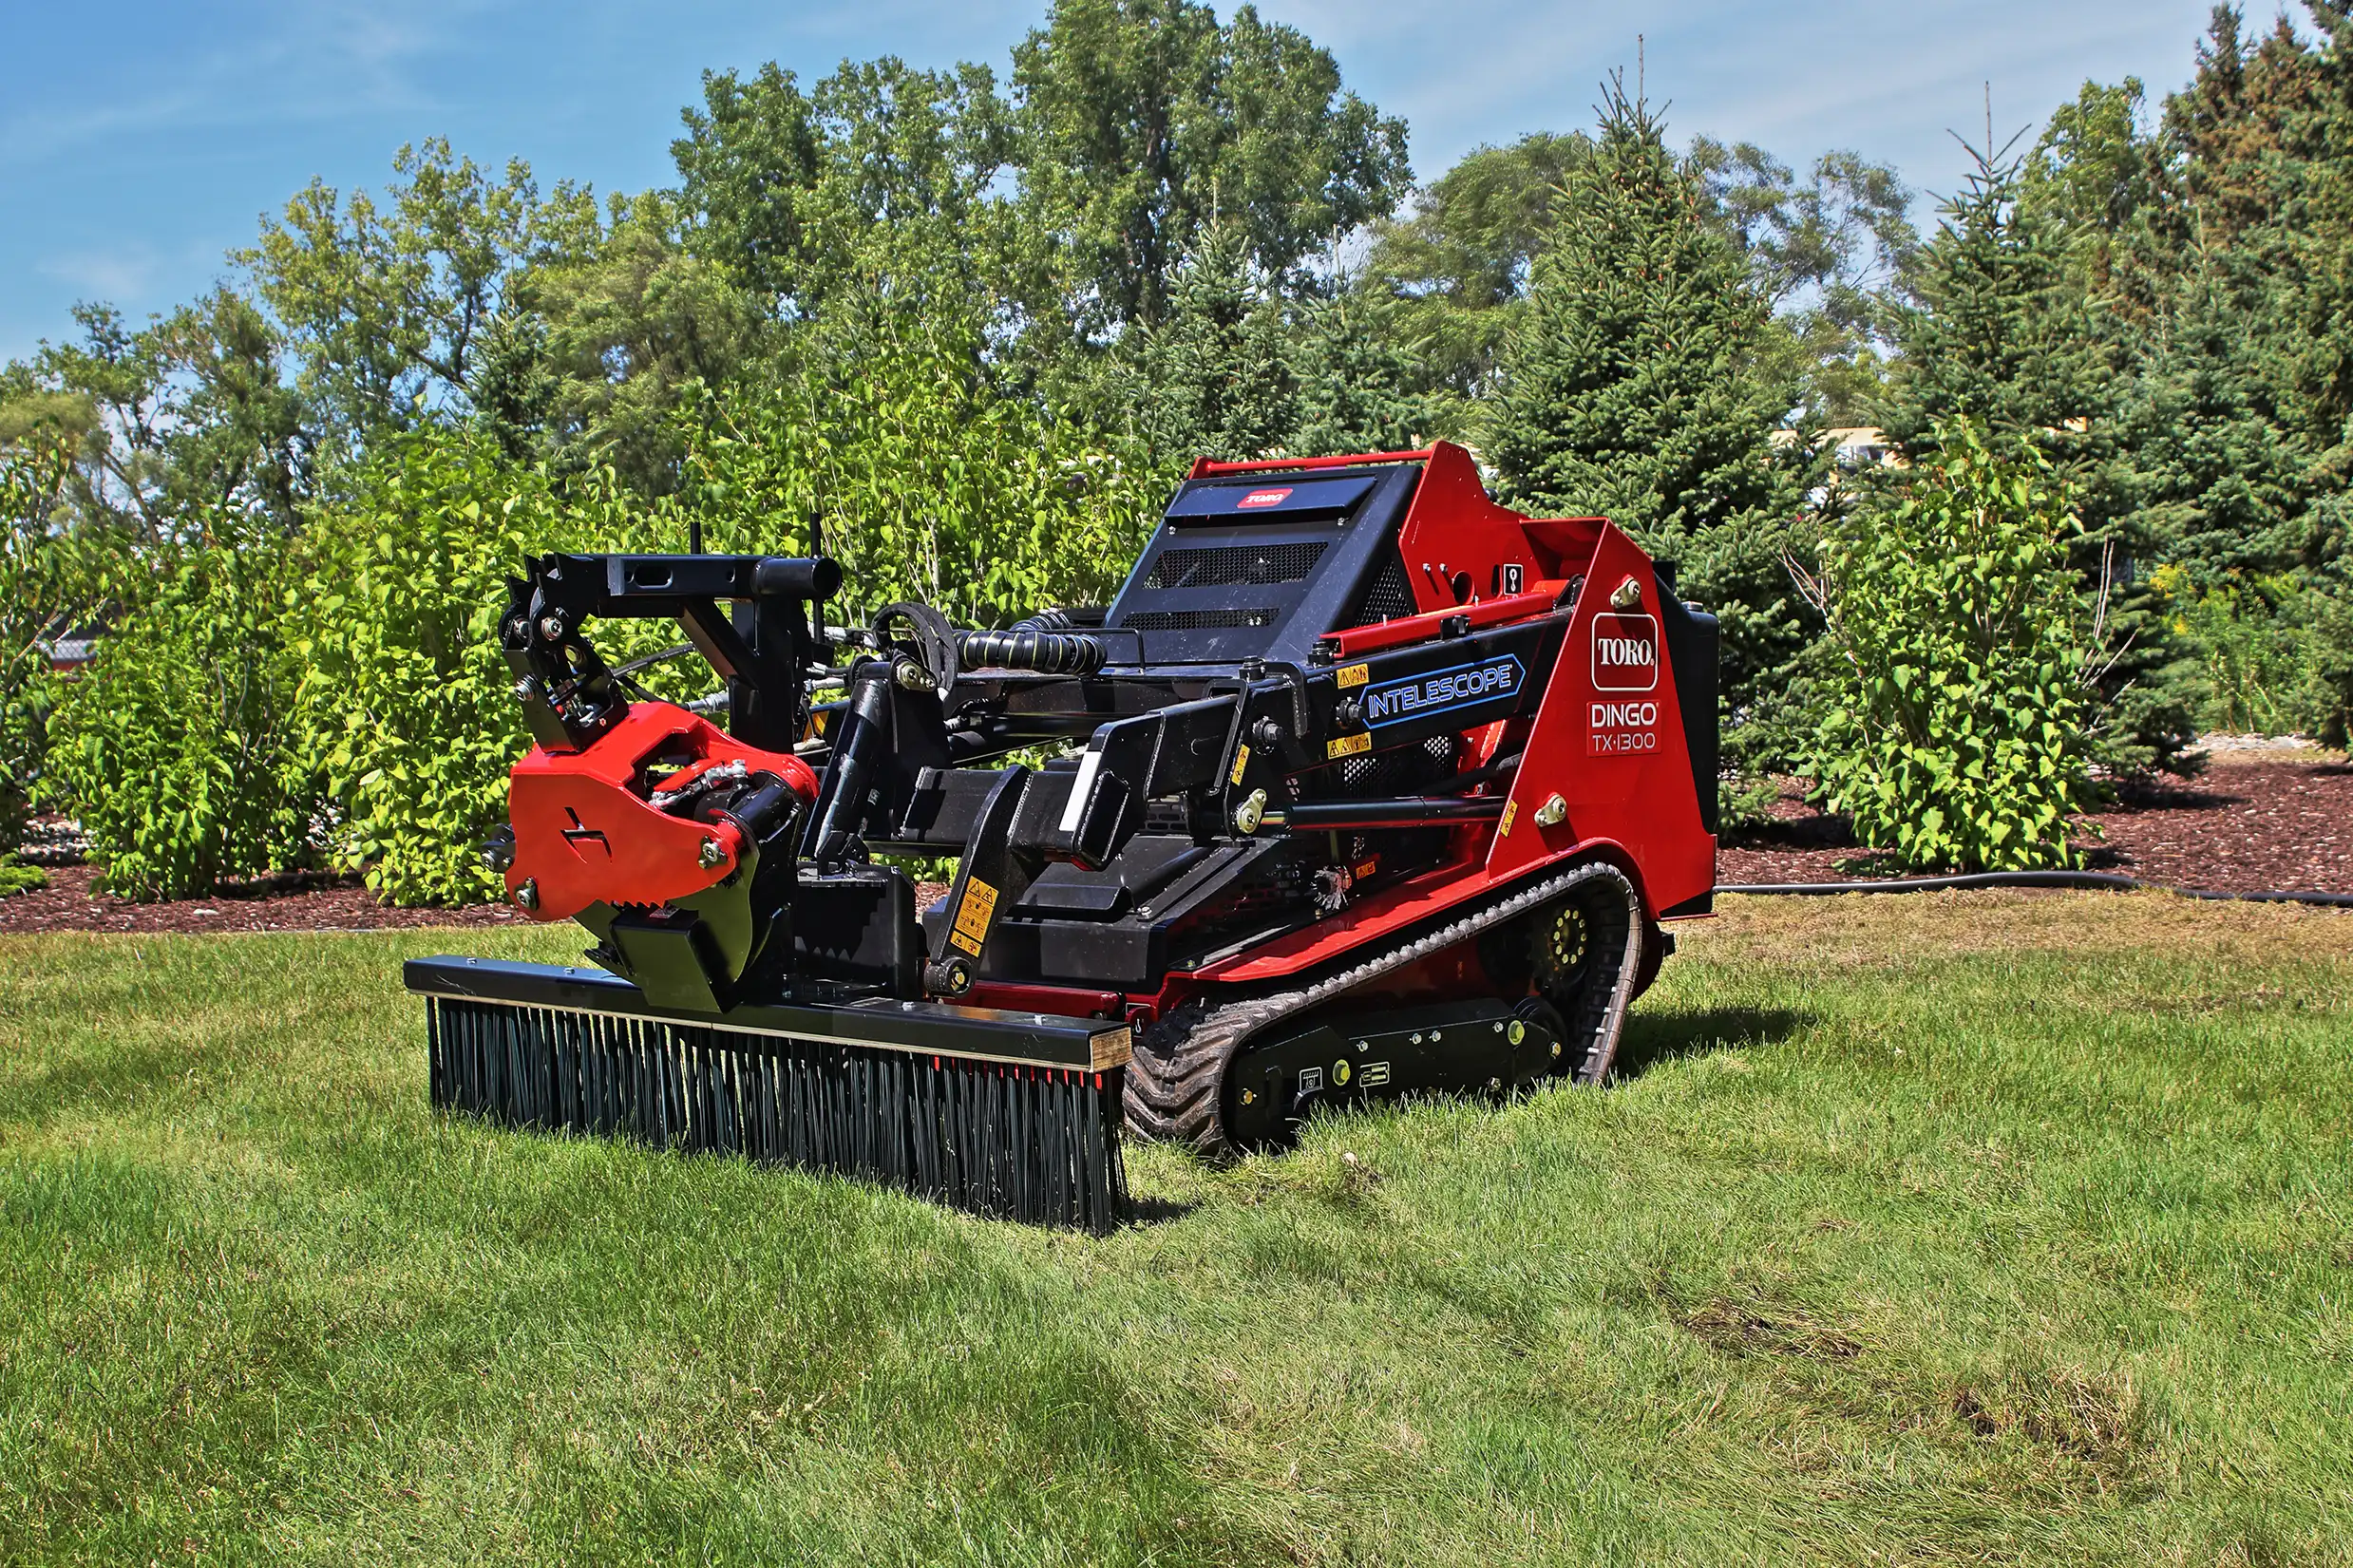 T3005 Grapple with the T1070 BMG Rake on a Toro Dingo TX-1300